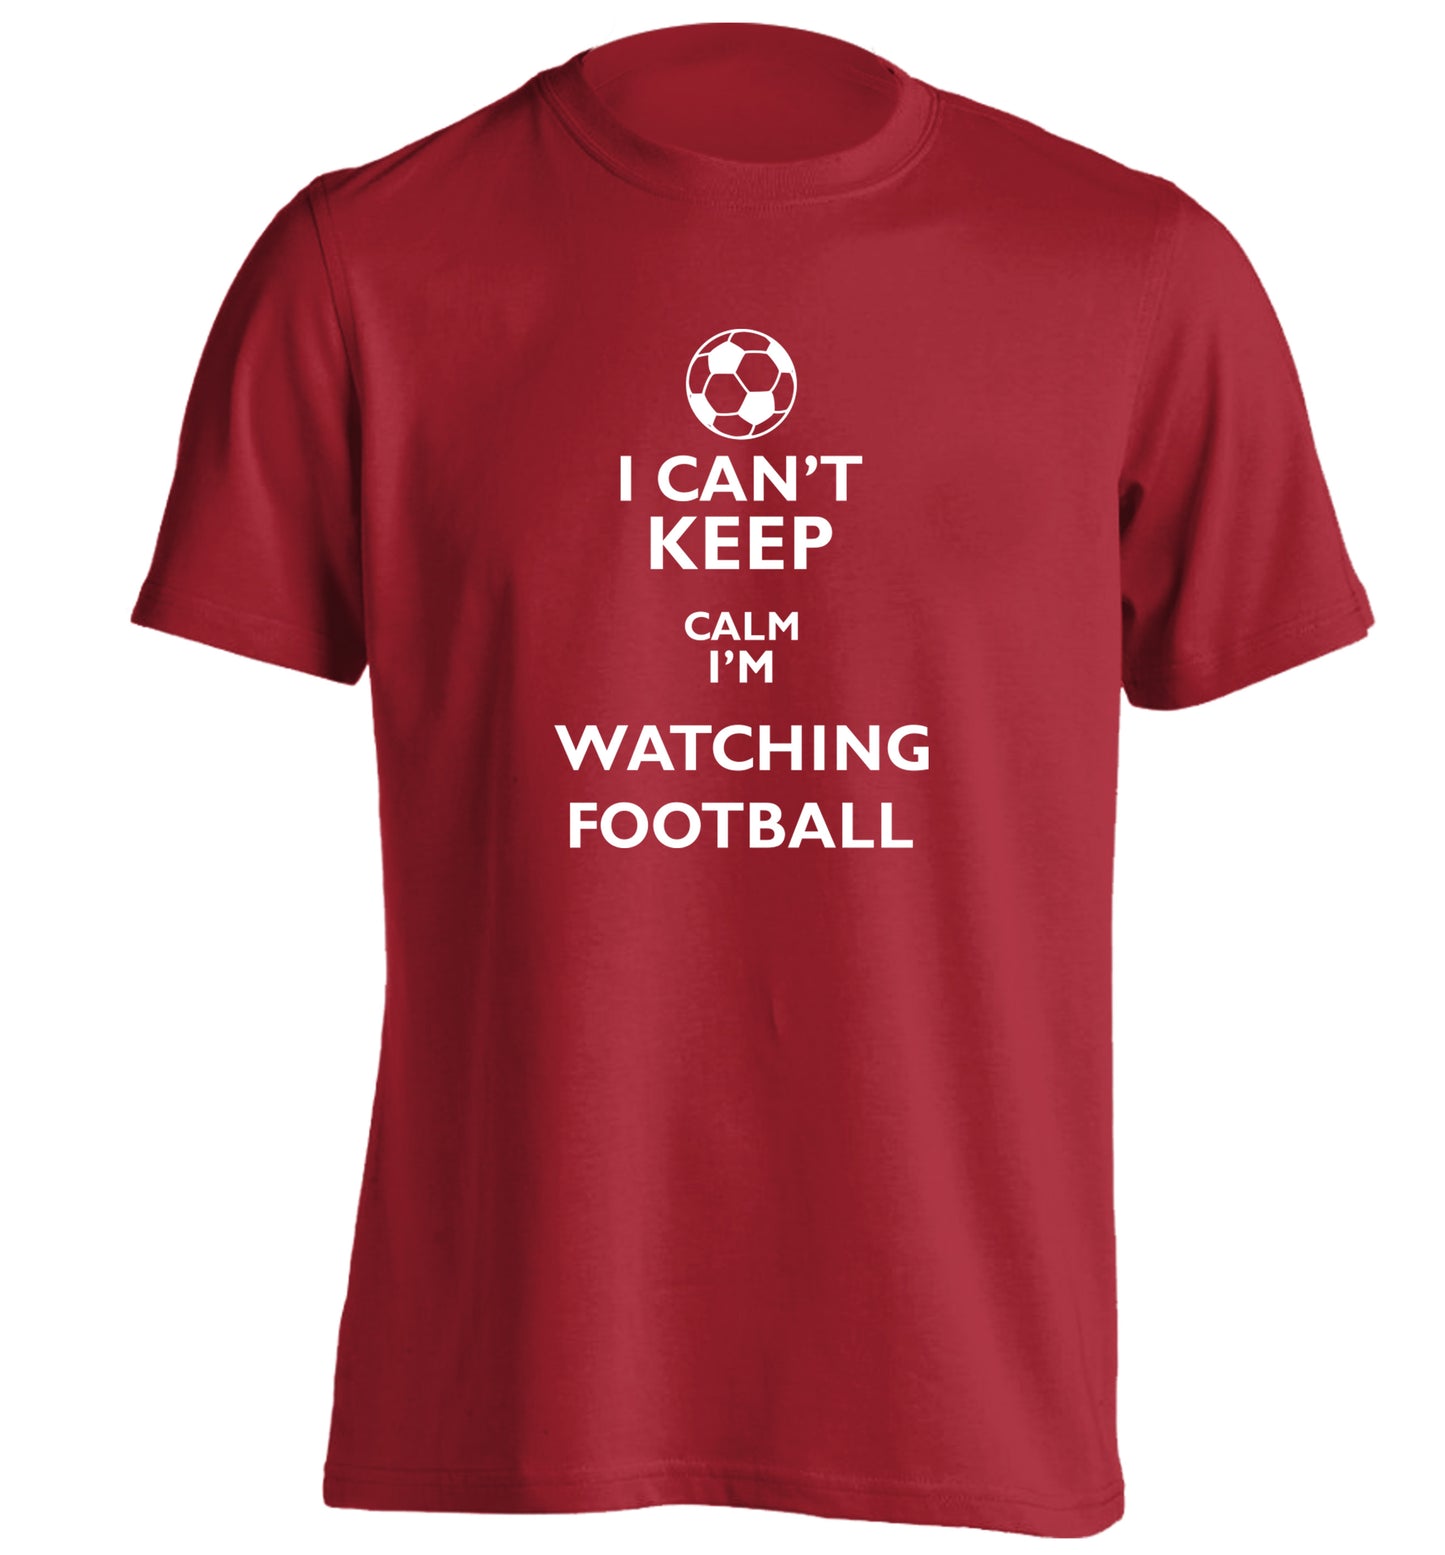 I can't keep calm I'm watching the football adults unisexred Tshirt 2XL